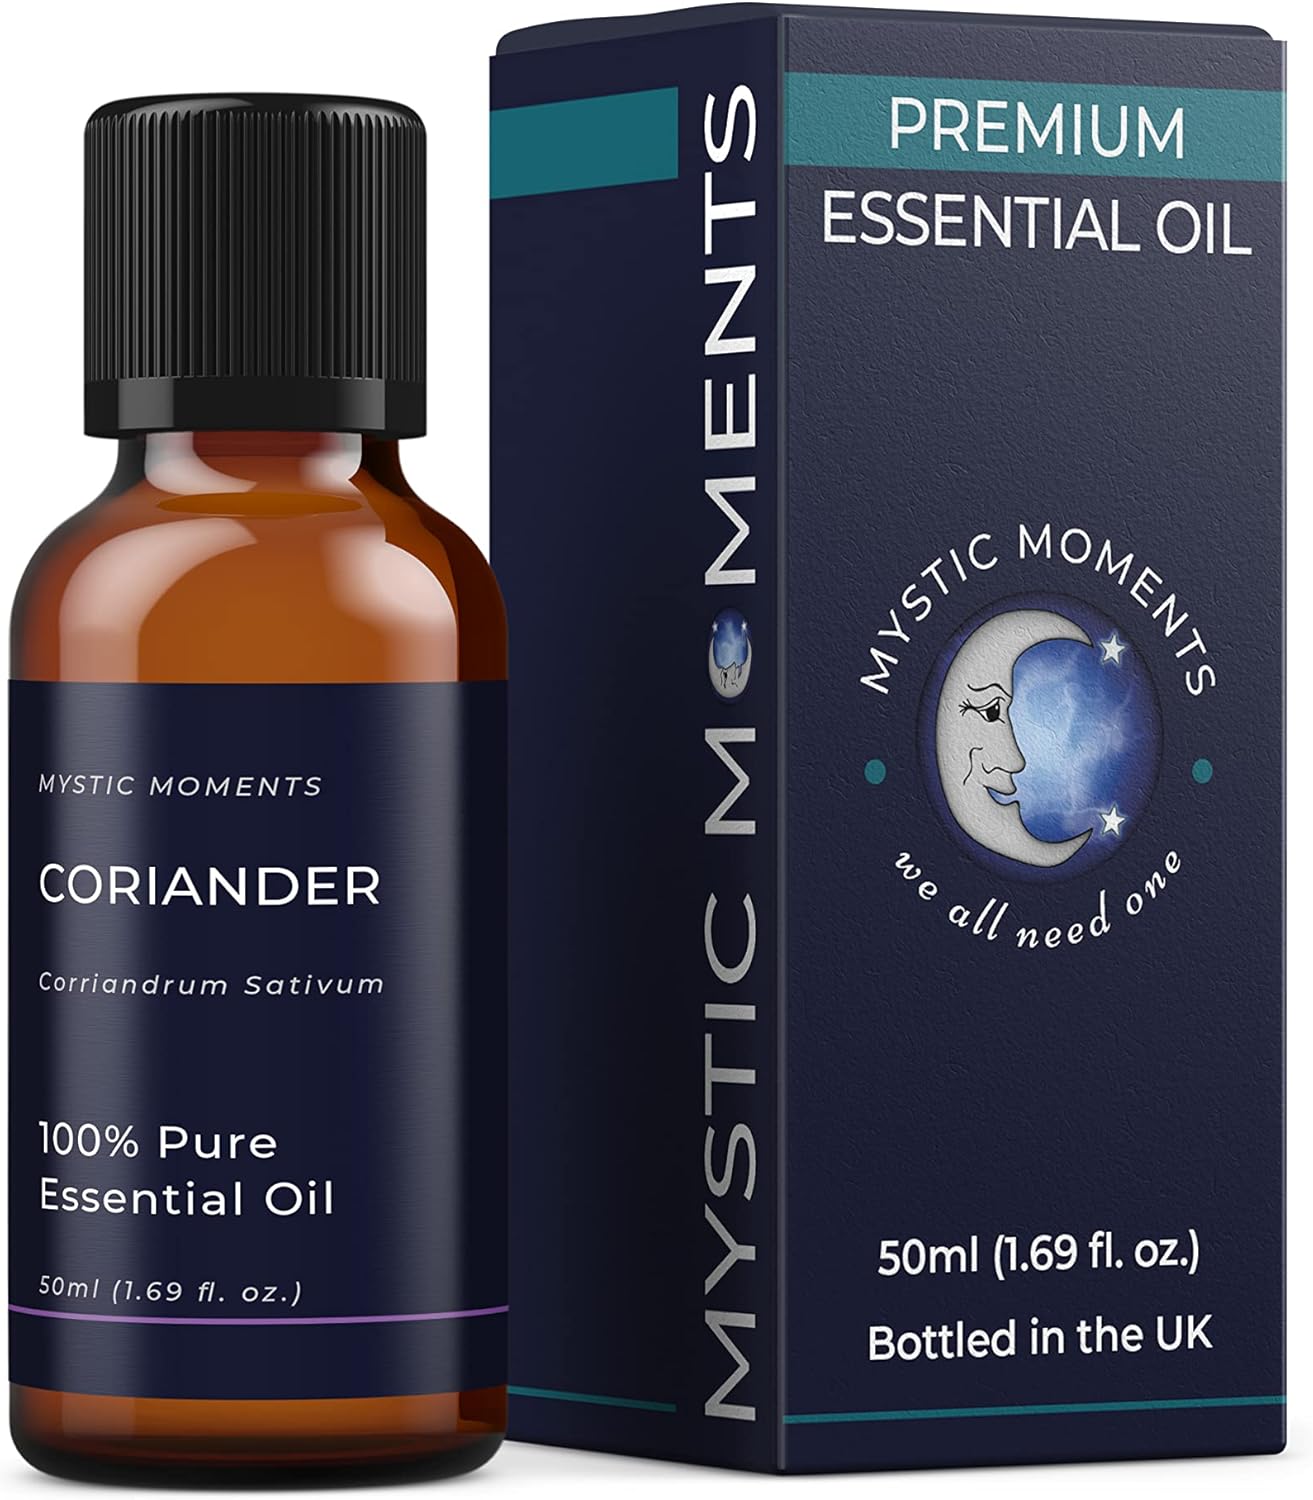 Mystic Moments | Coriander Essential Oil 50ml - Pure & Natural oil for Diffusers, Aromatherapy & Massage Blends Vegan GMO Free